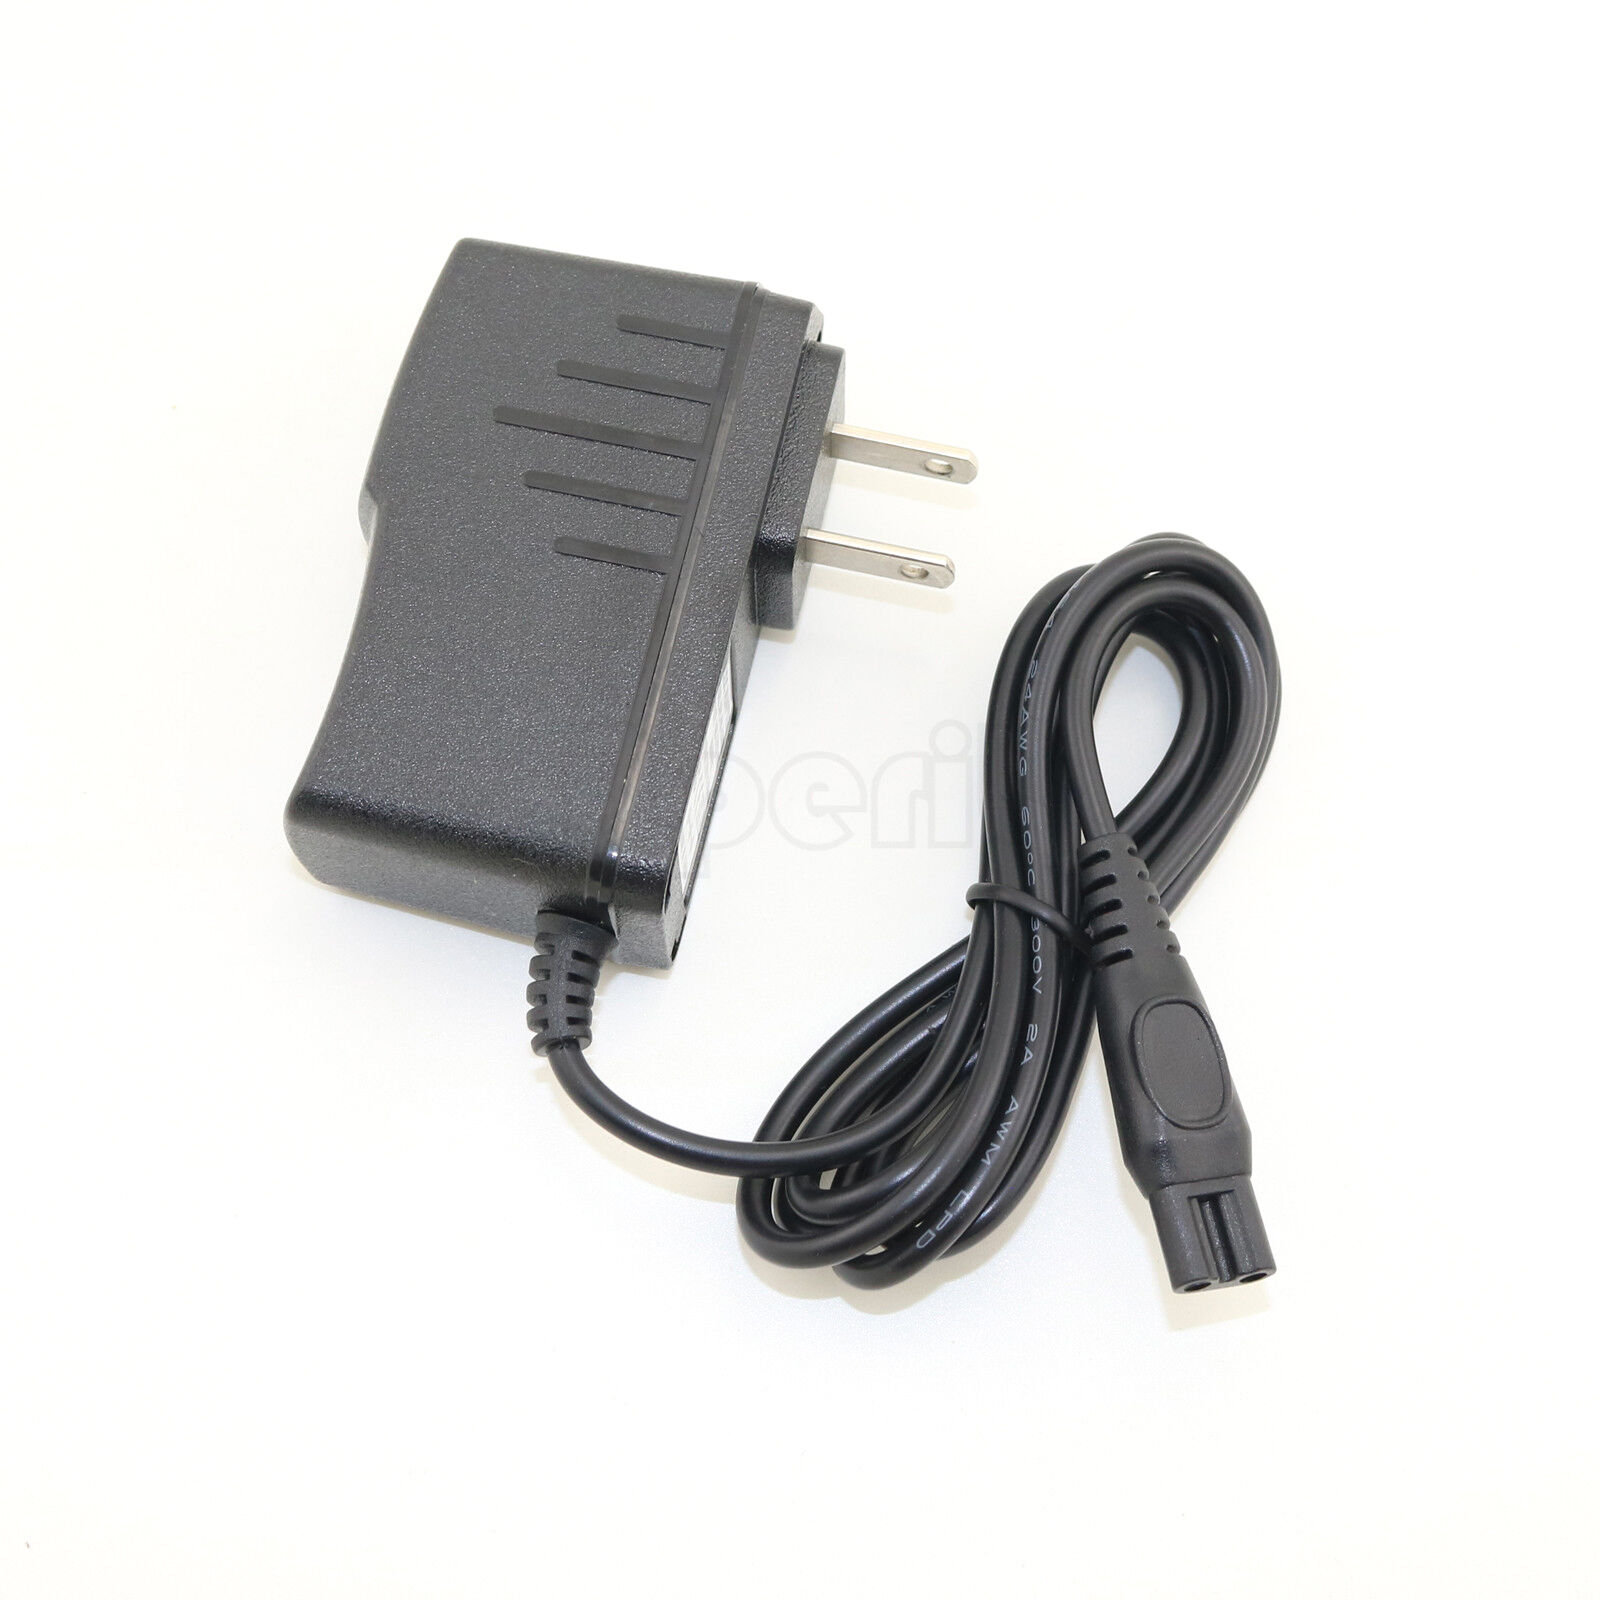 15V AC/DC Power Adapter Charger Cord Lead For Philip Hair Cutter HC3420 Type: AC/DC Adapter MPN: Does not apply Outp